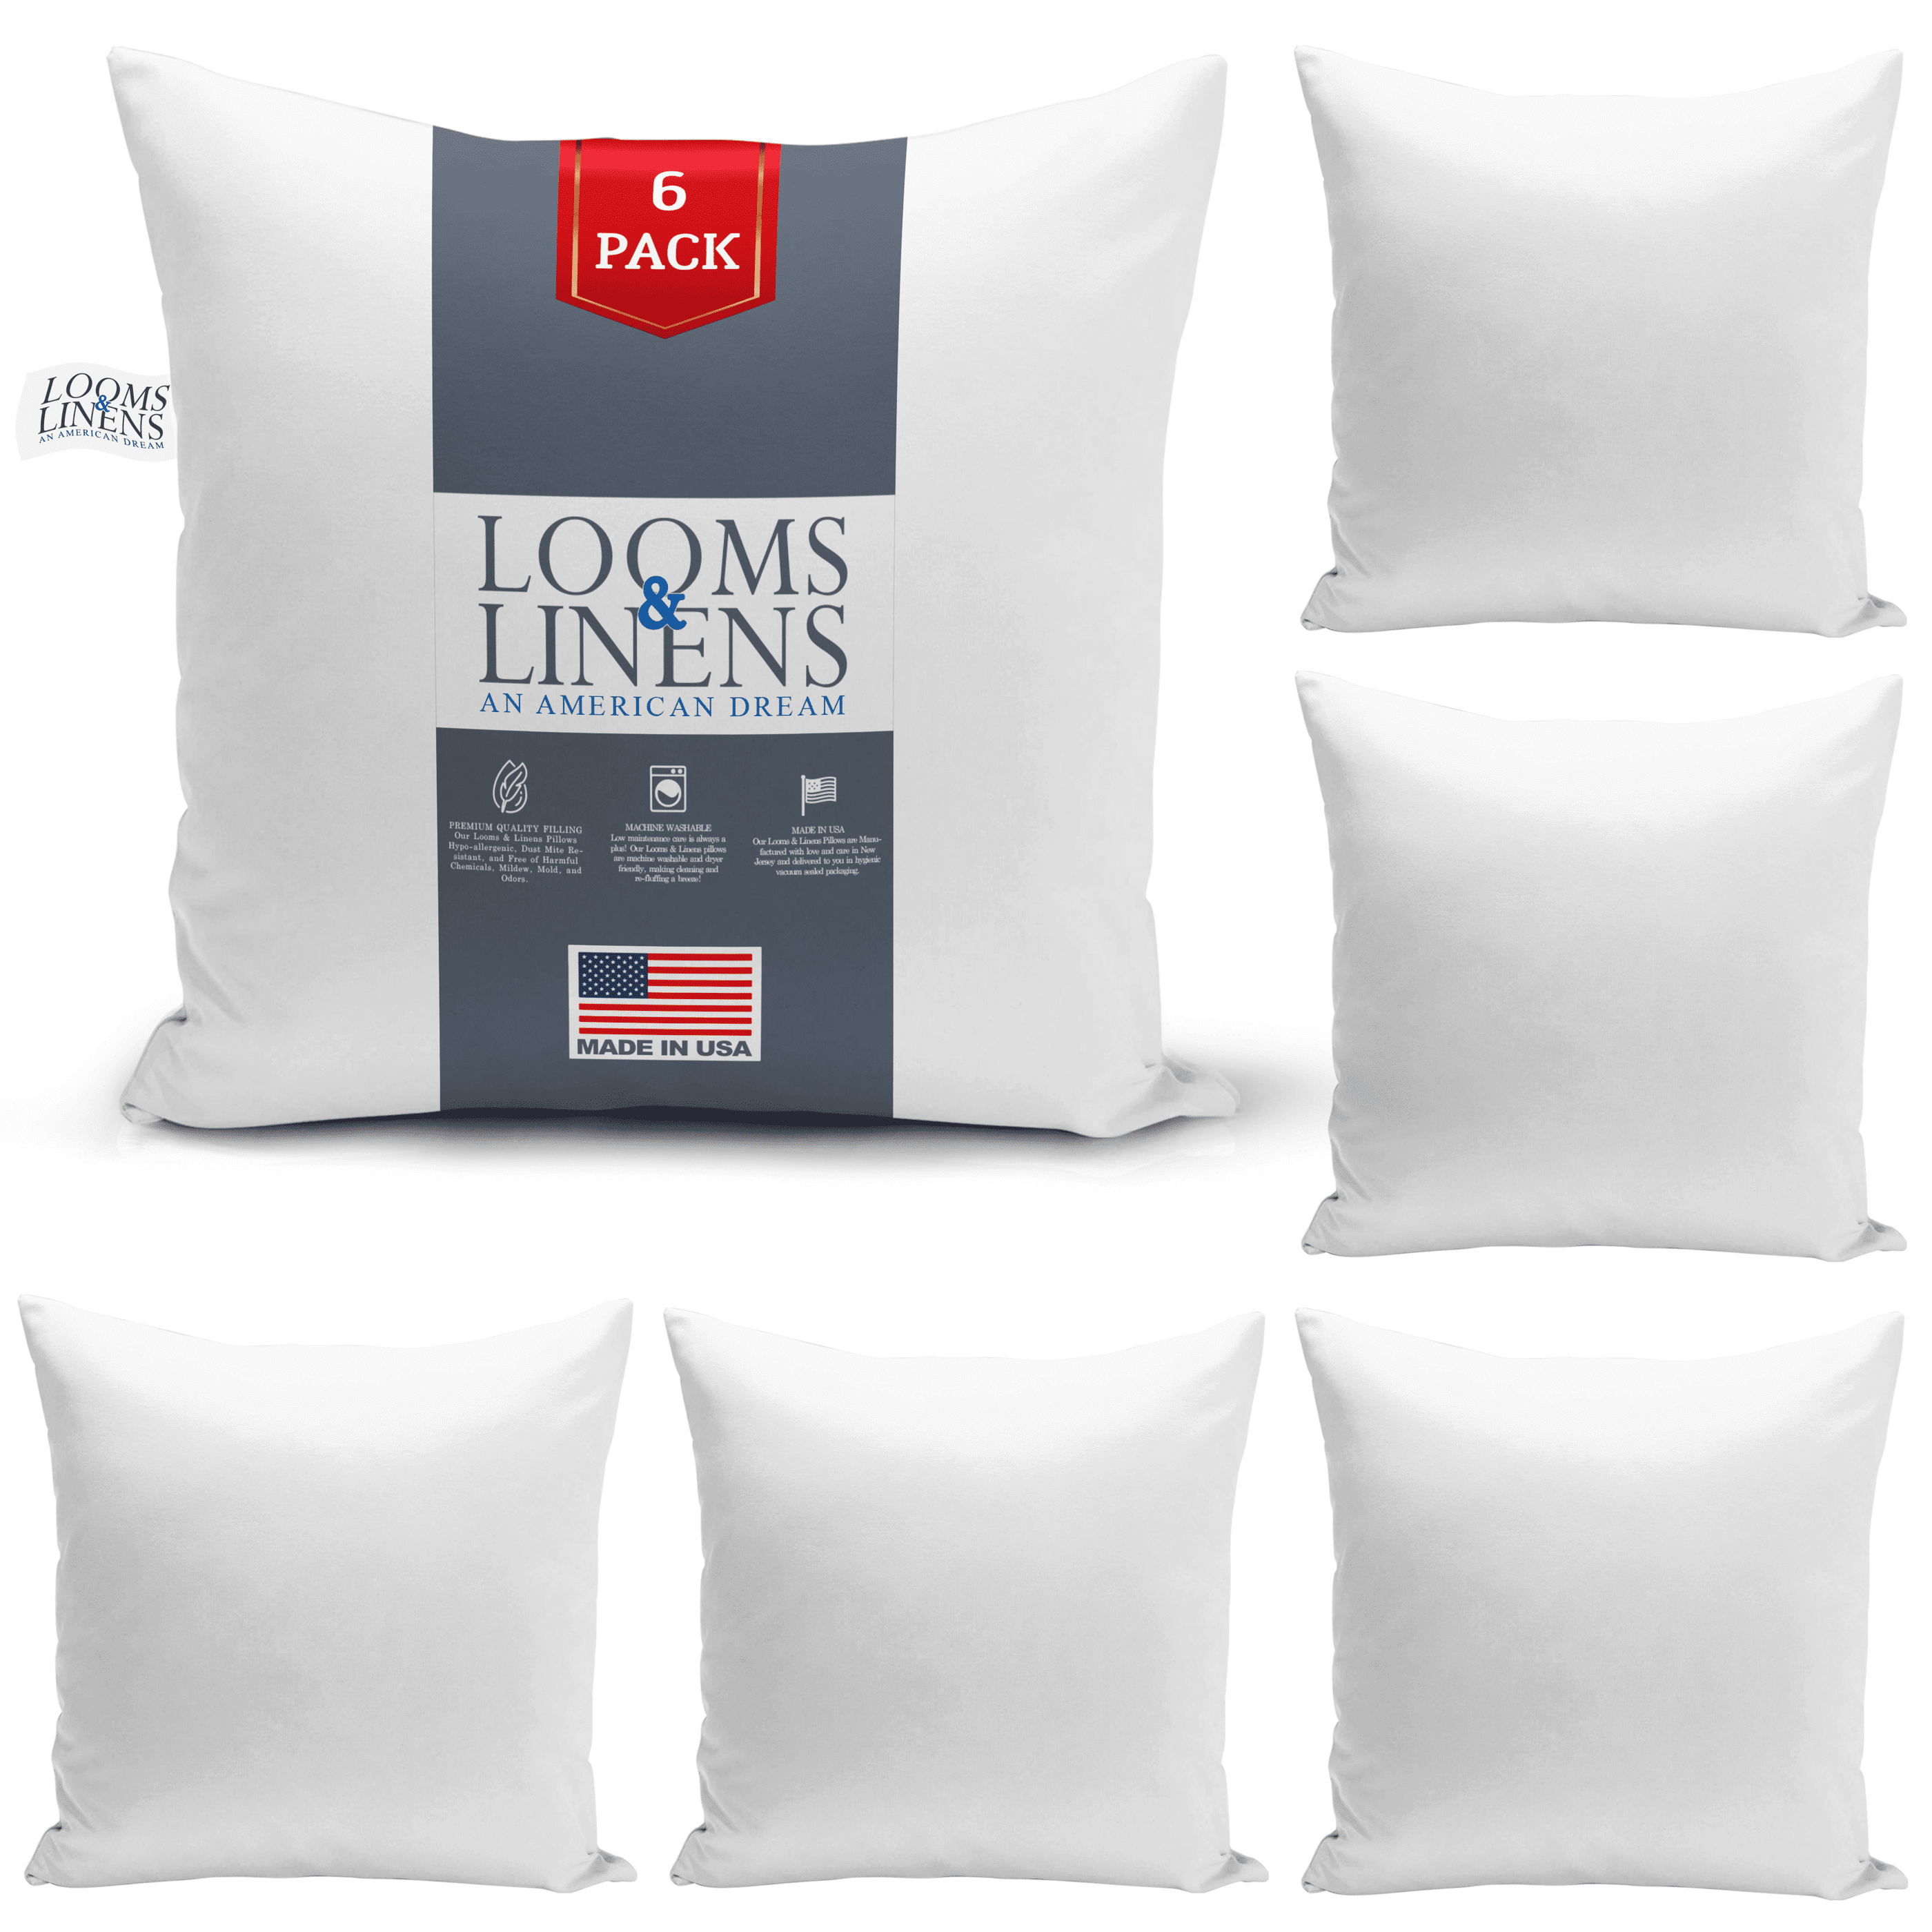 Made in USA New Pillow Insert Form Square Euro Premium ALL SIZES! 